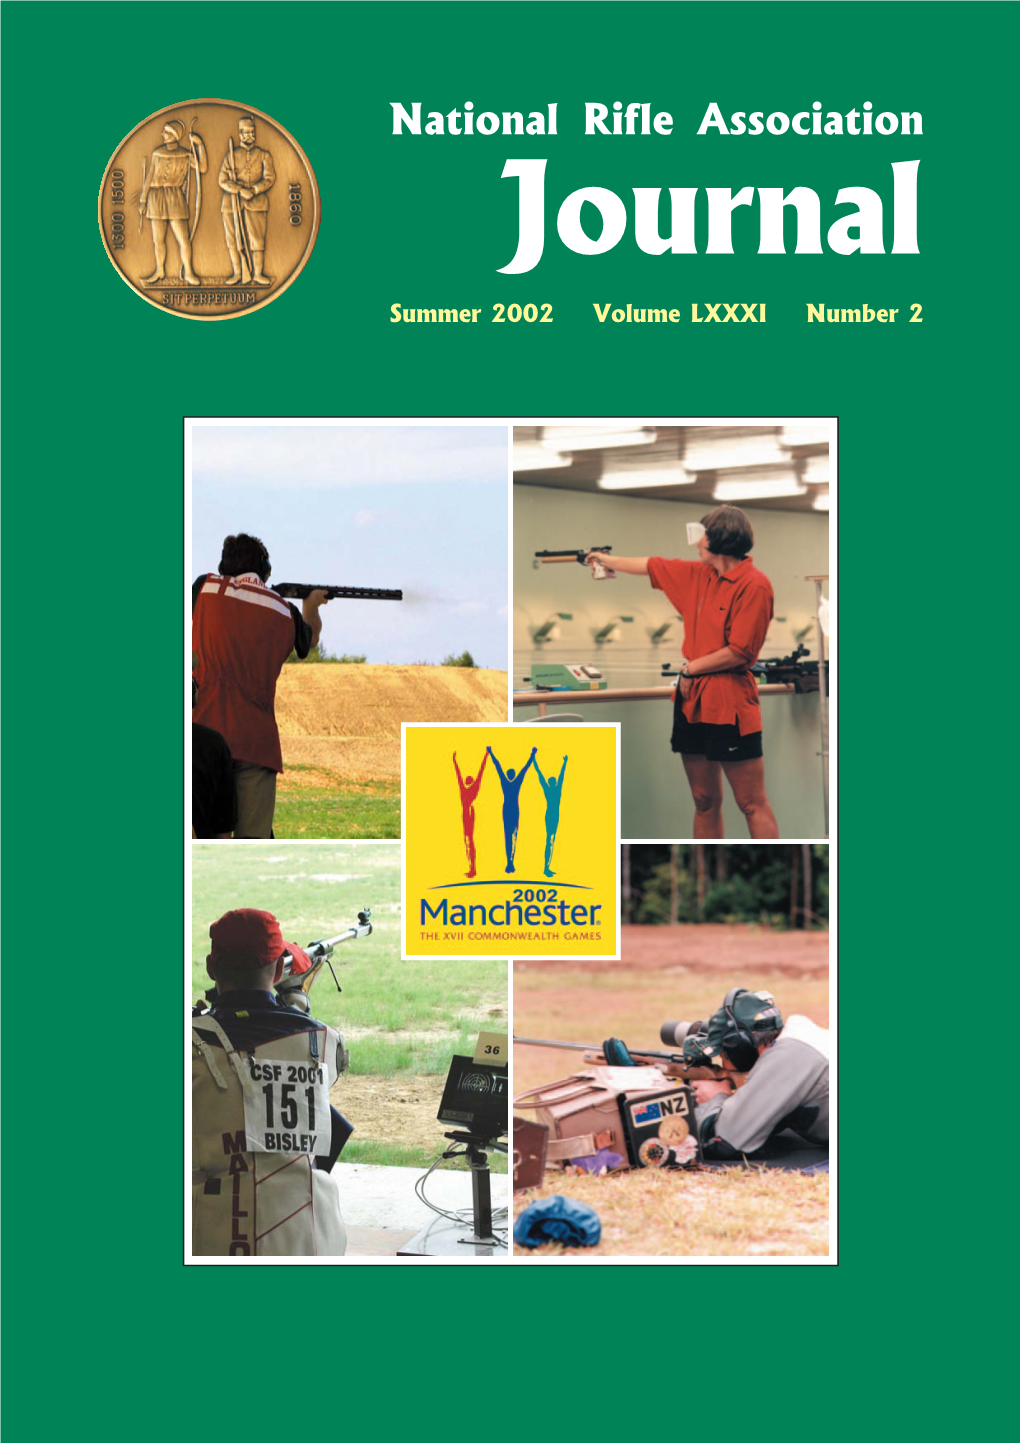 NRA Journal May.Pmd